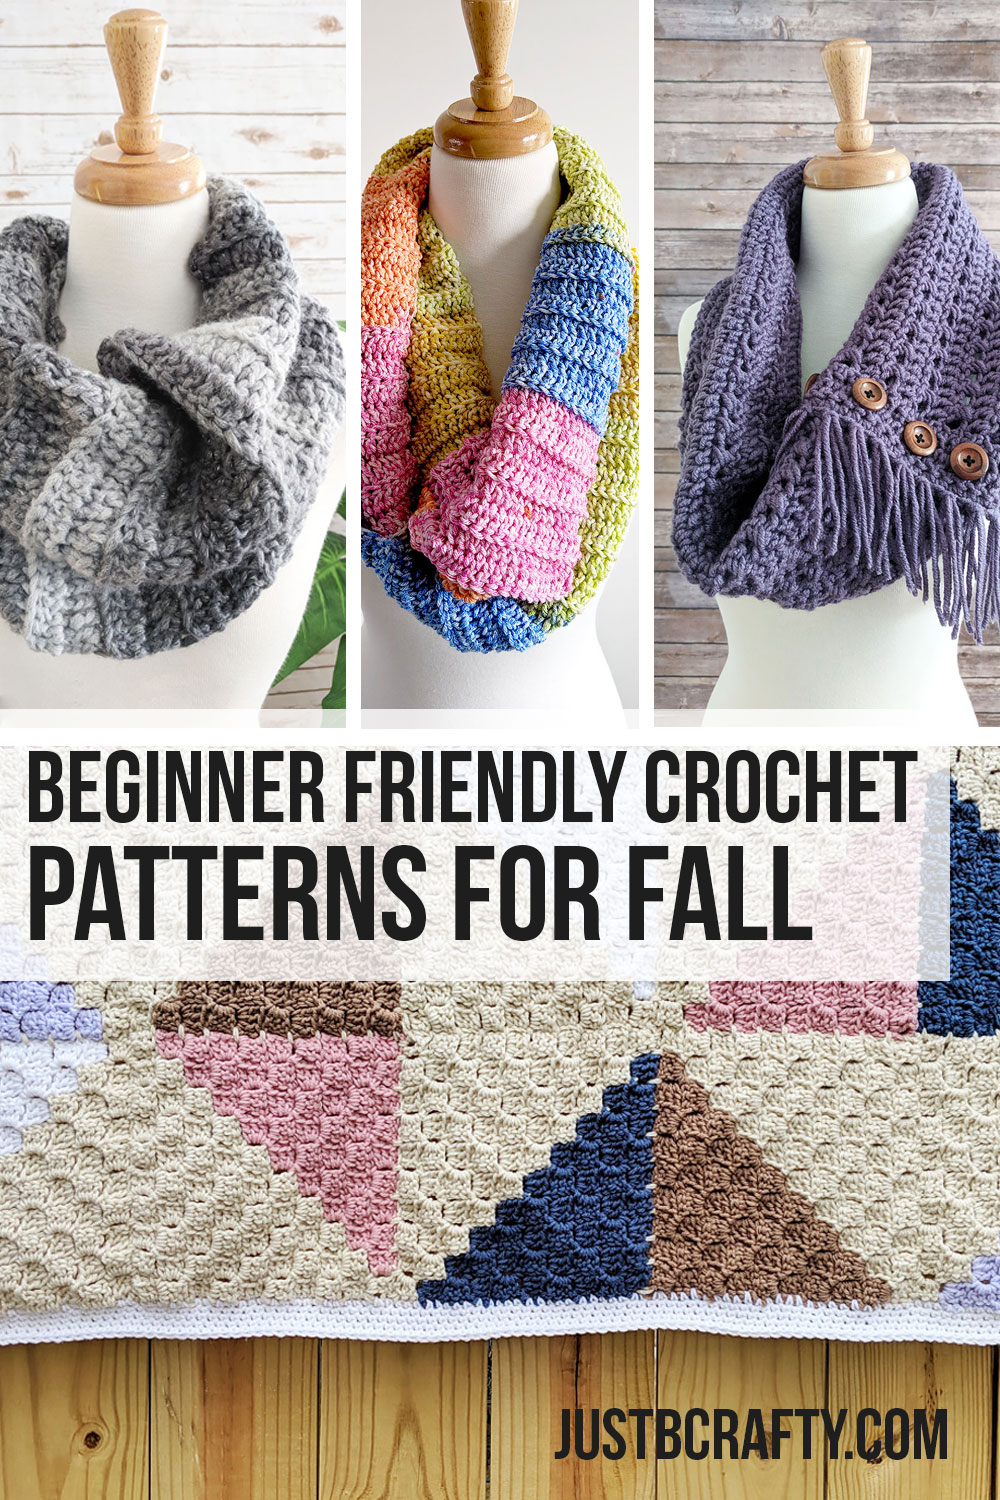 Beginner Friendly Crochet Patterns for Fall - Free crochet patterns by Just Be Crafty